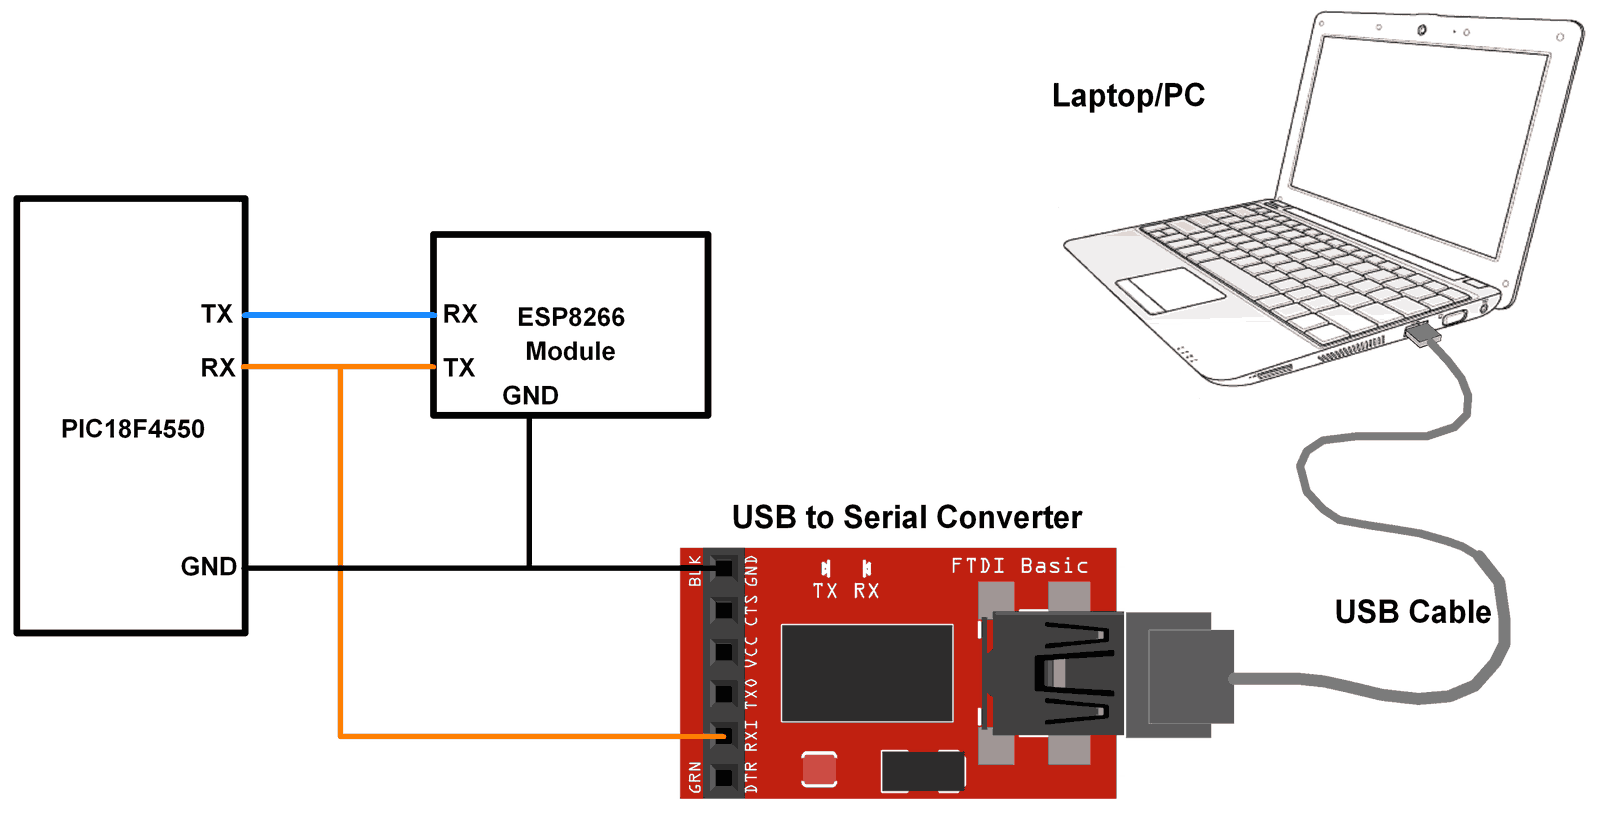 PIC18F4550 Interface with ESP8266 along with PC